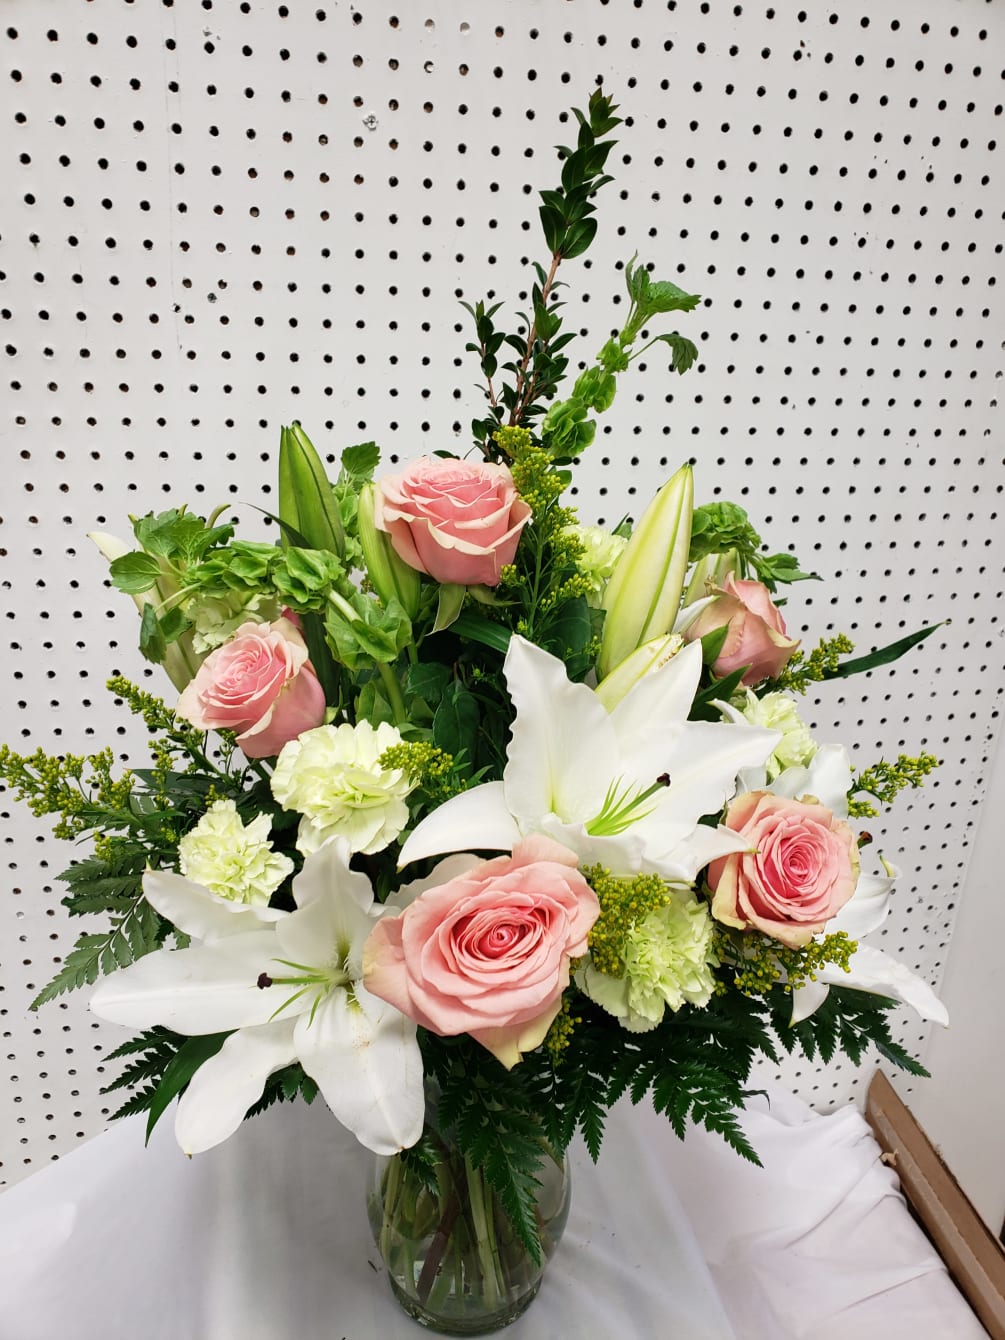 Vased  Arrangement with pink roses, white lillies, green carns with greenery
It